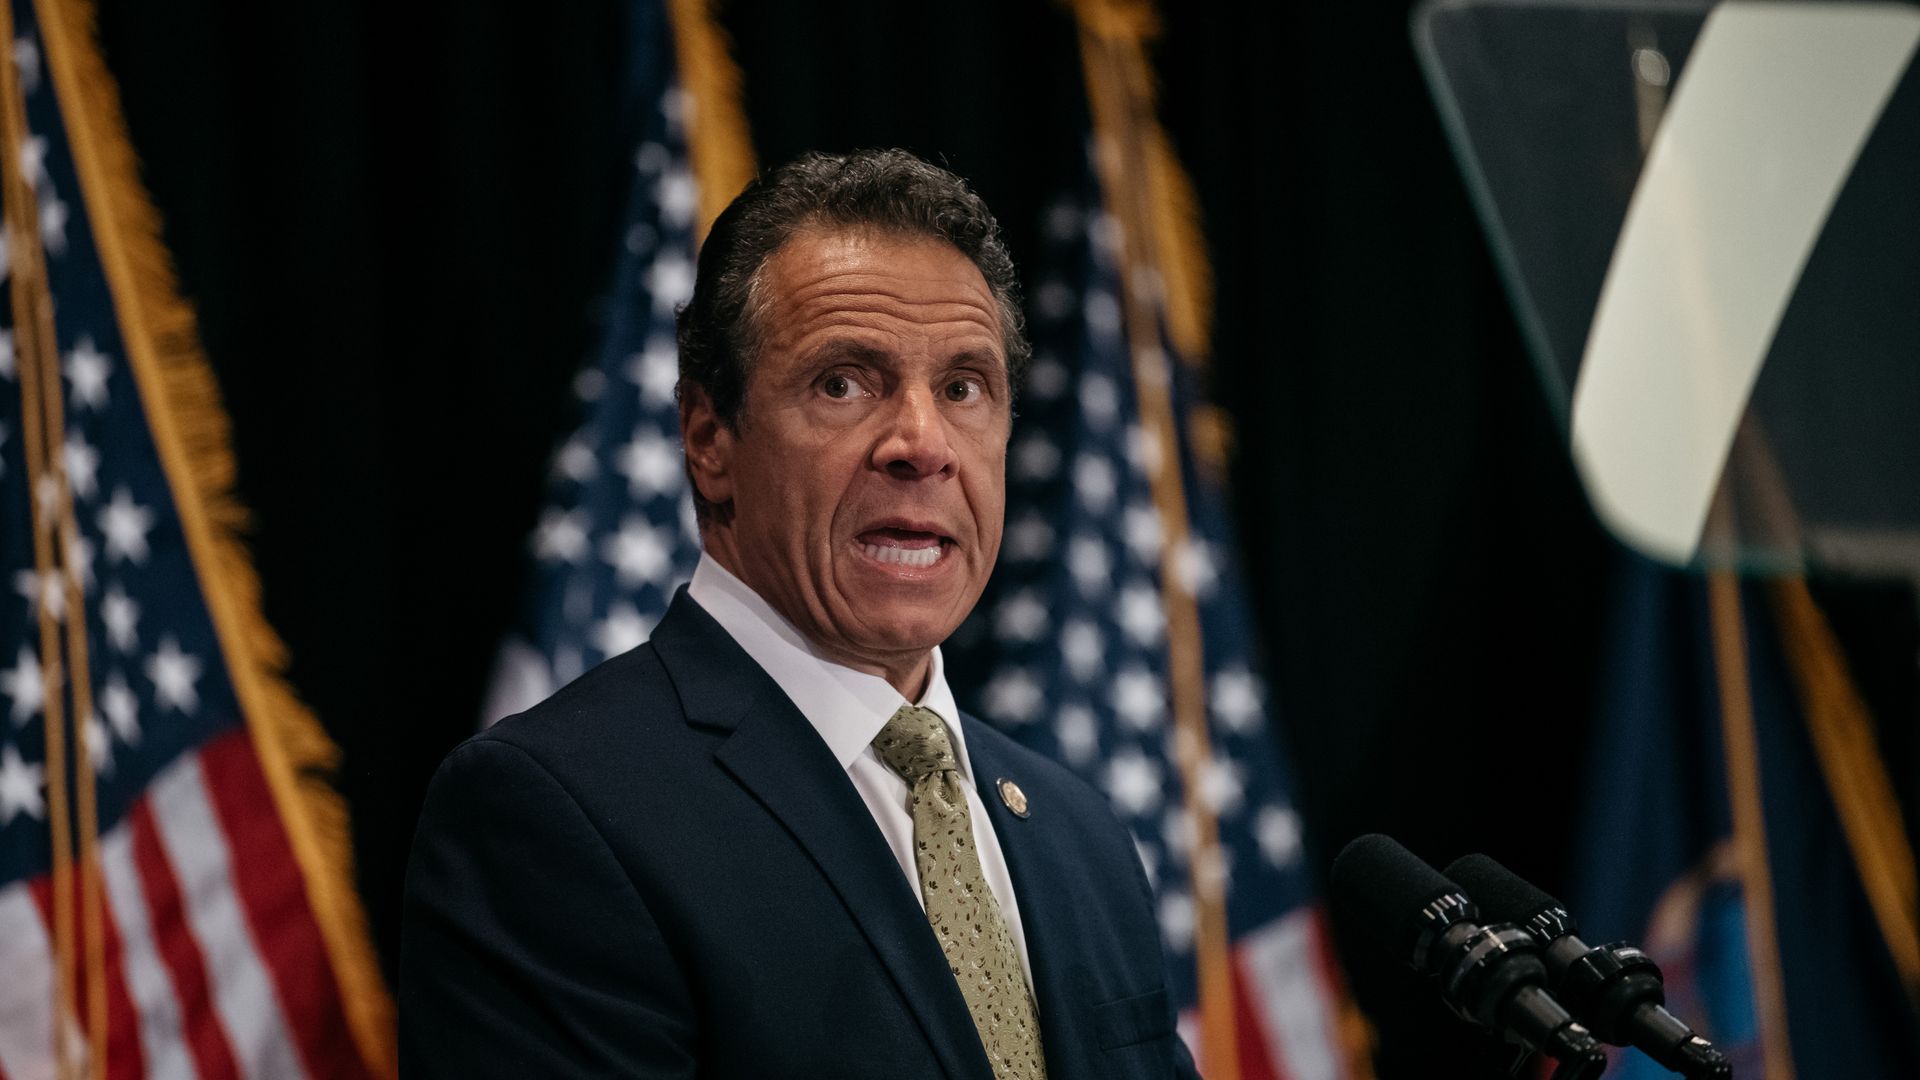 Andrew Cuomo speaks at an event